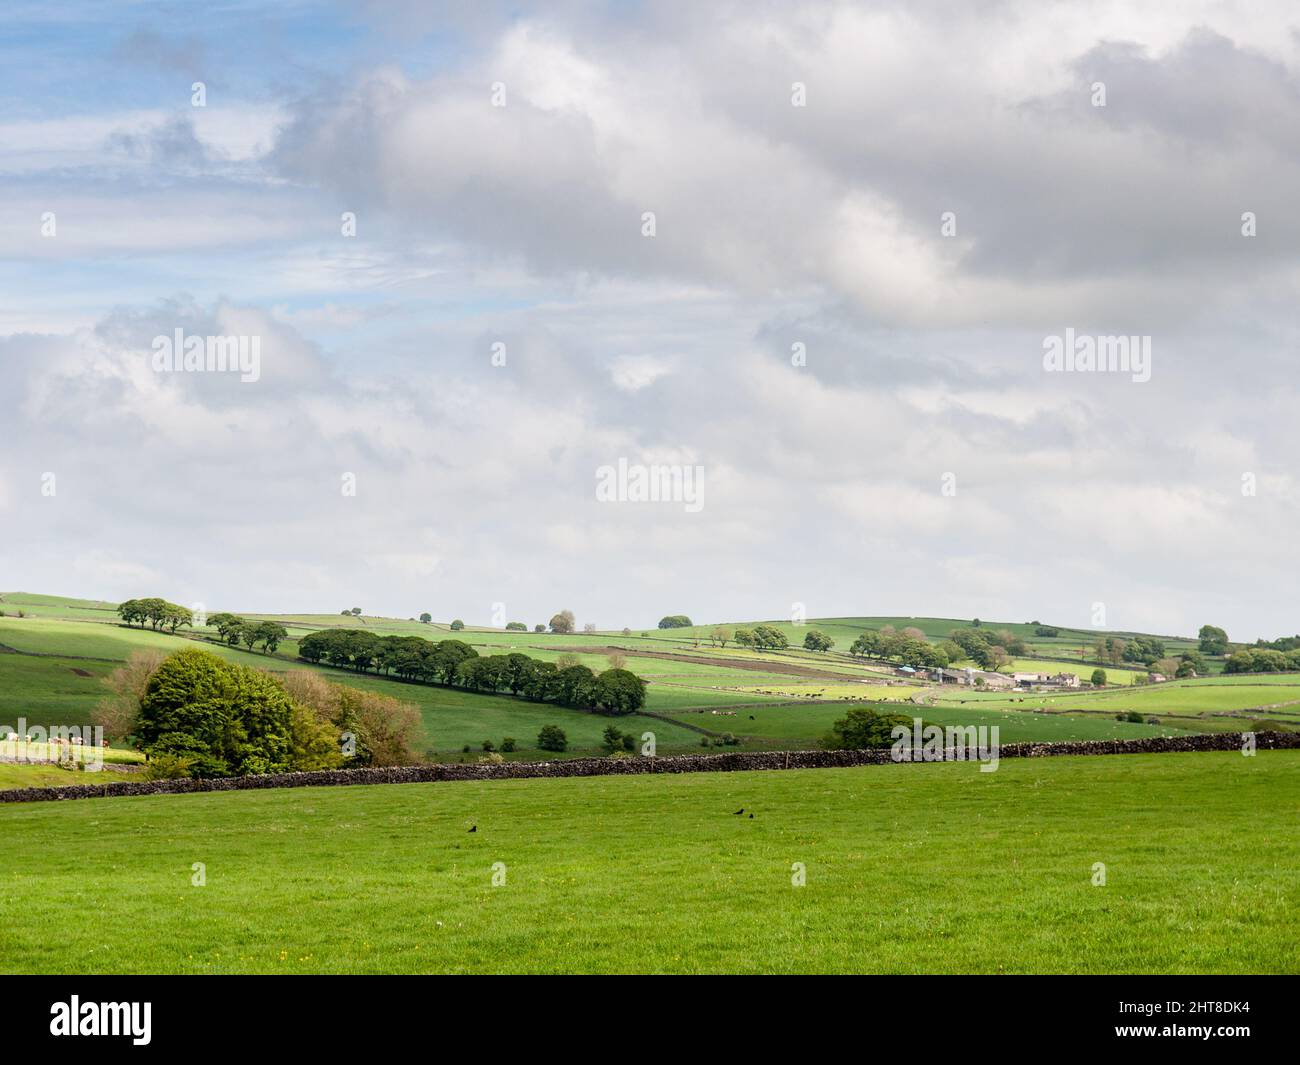 Cattle and sheep graze on fields beside a farmyard on the rolling hills of England's Peak District. Stock Photo